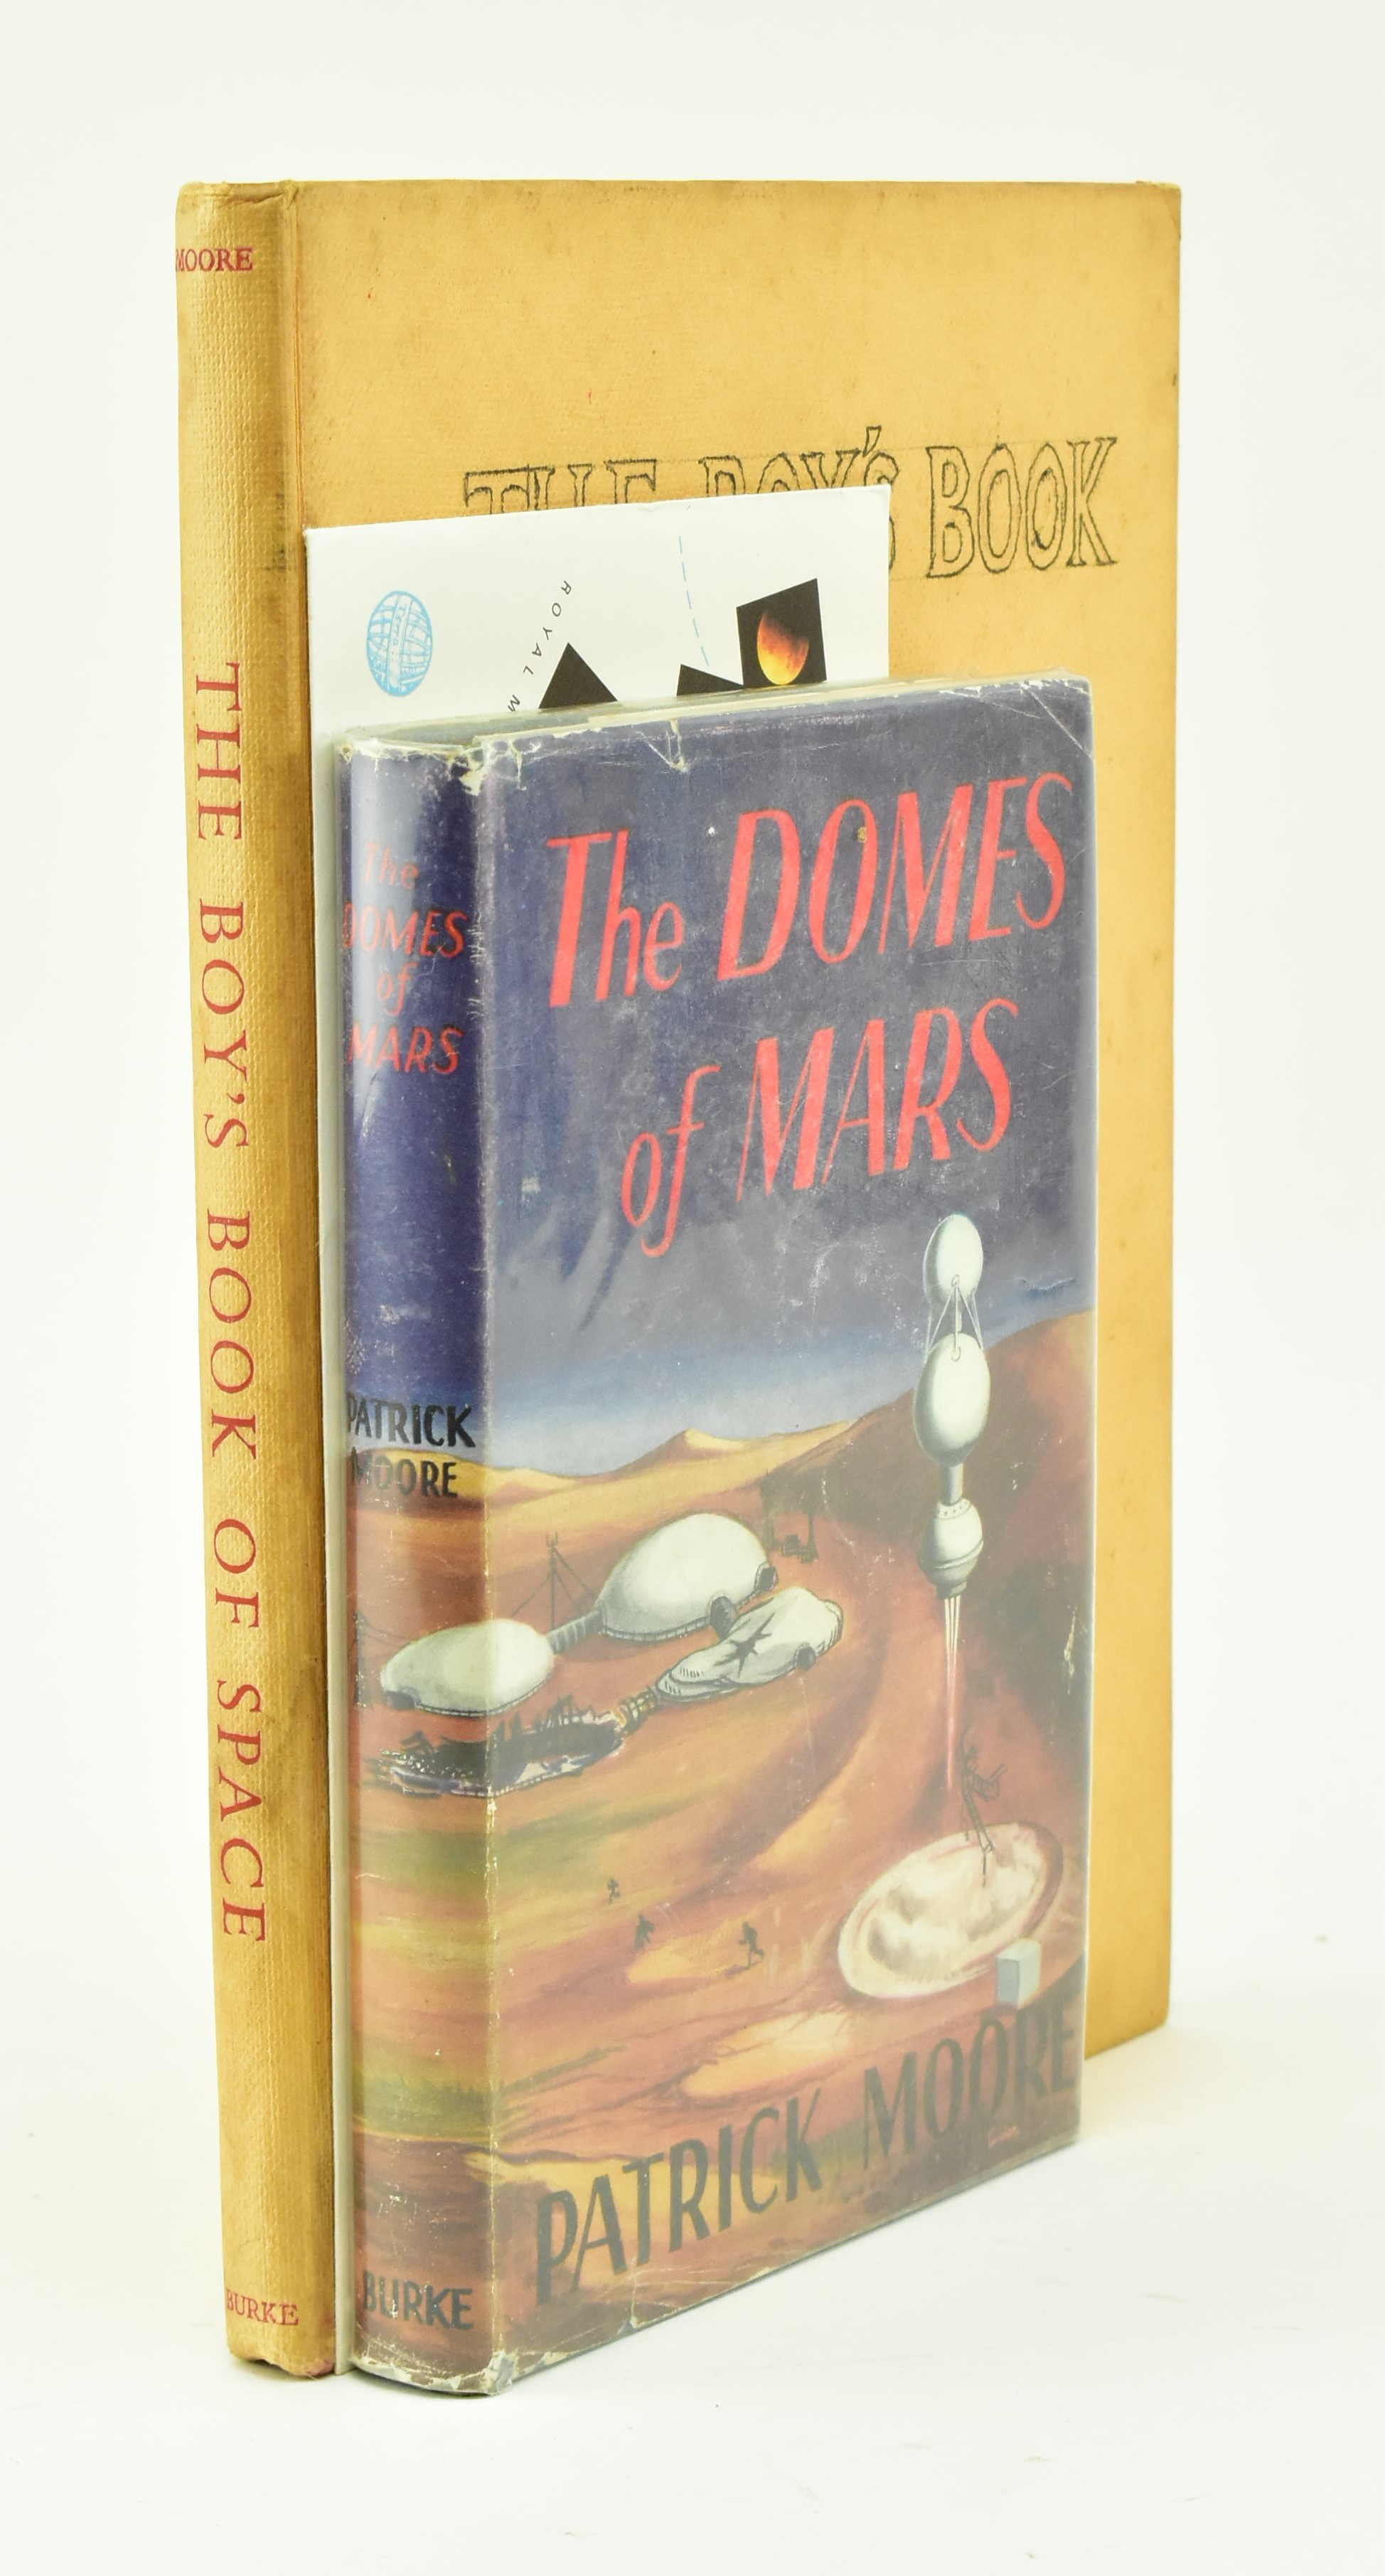 PATRICK MOORE - THE DOMES OF MARS 1ST EDITION & SIGNED FDC - Image 2 of 7